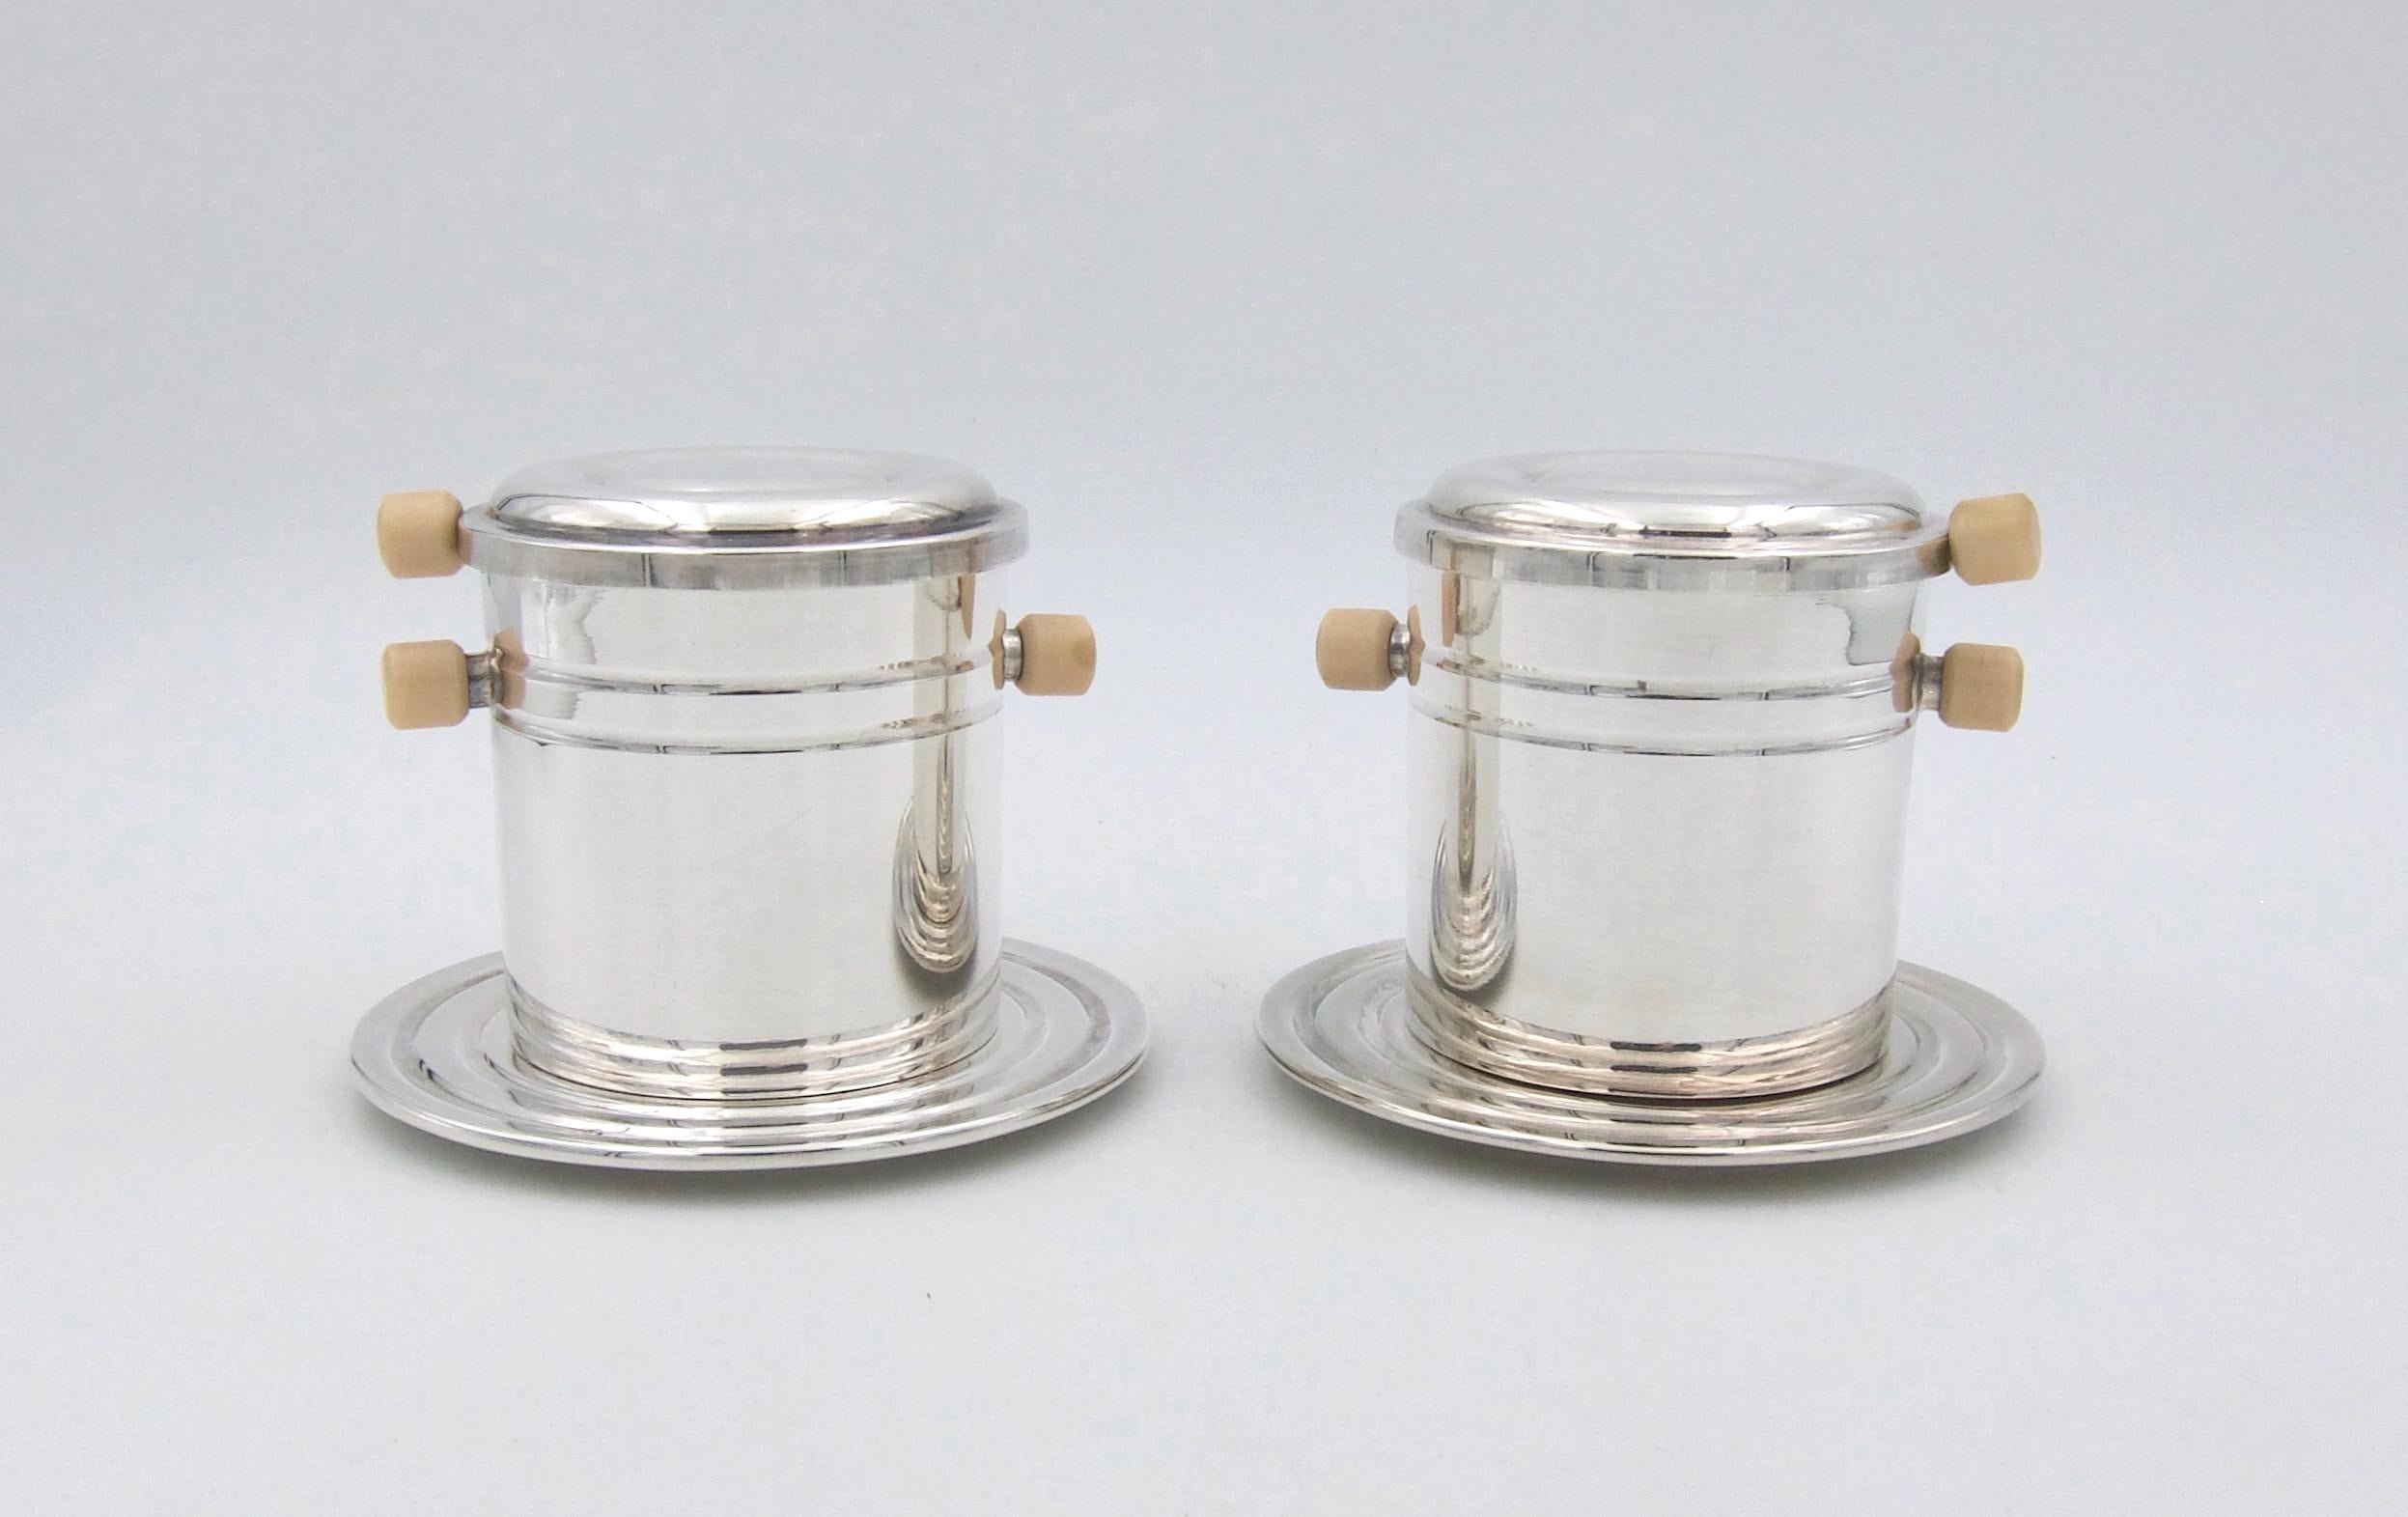 A pair of Christofle of Paris Art Deco coffee strainers from the original line of Gallia metal silver plated luxury goods. The coffee strainers rest atop a cup or mug and serve as an individual French press for a single cup of coffee. Made in France